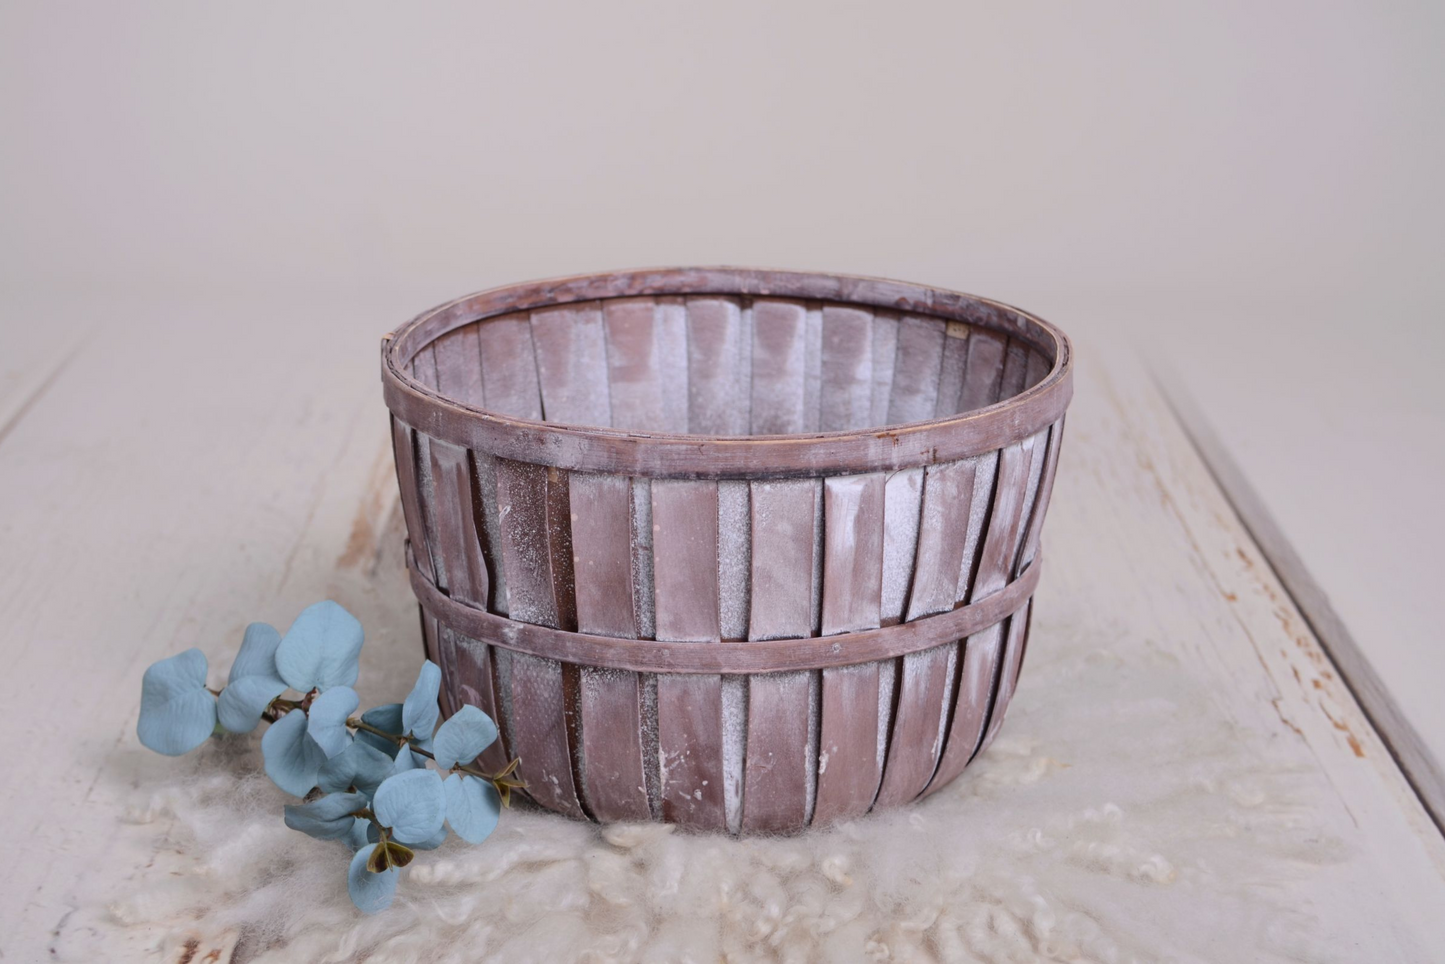 Vintage wooden bucket prop with rustic finish. Perfect for newborn photography sessions. Available for purchase at Newborn Studio Props.